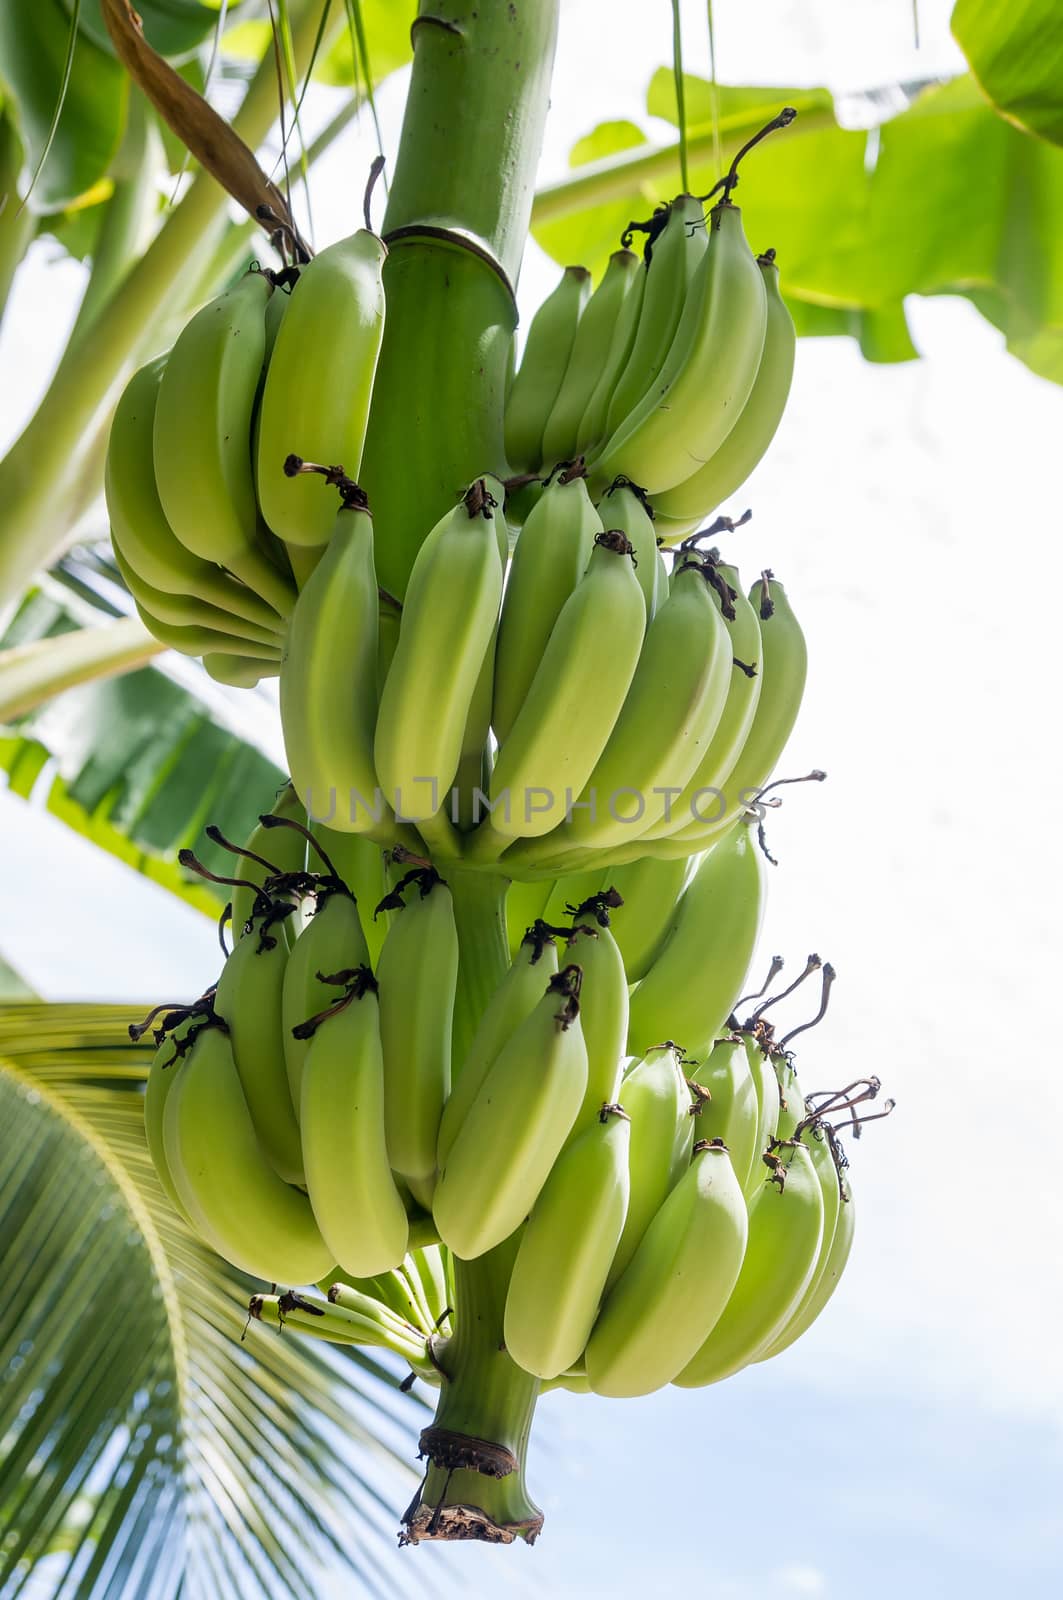 bunch of bananas by seksan44